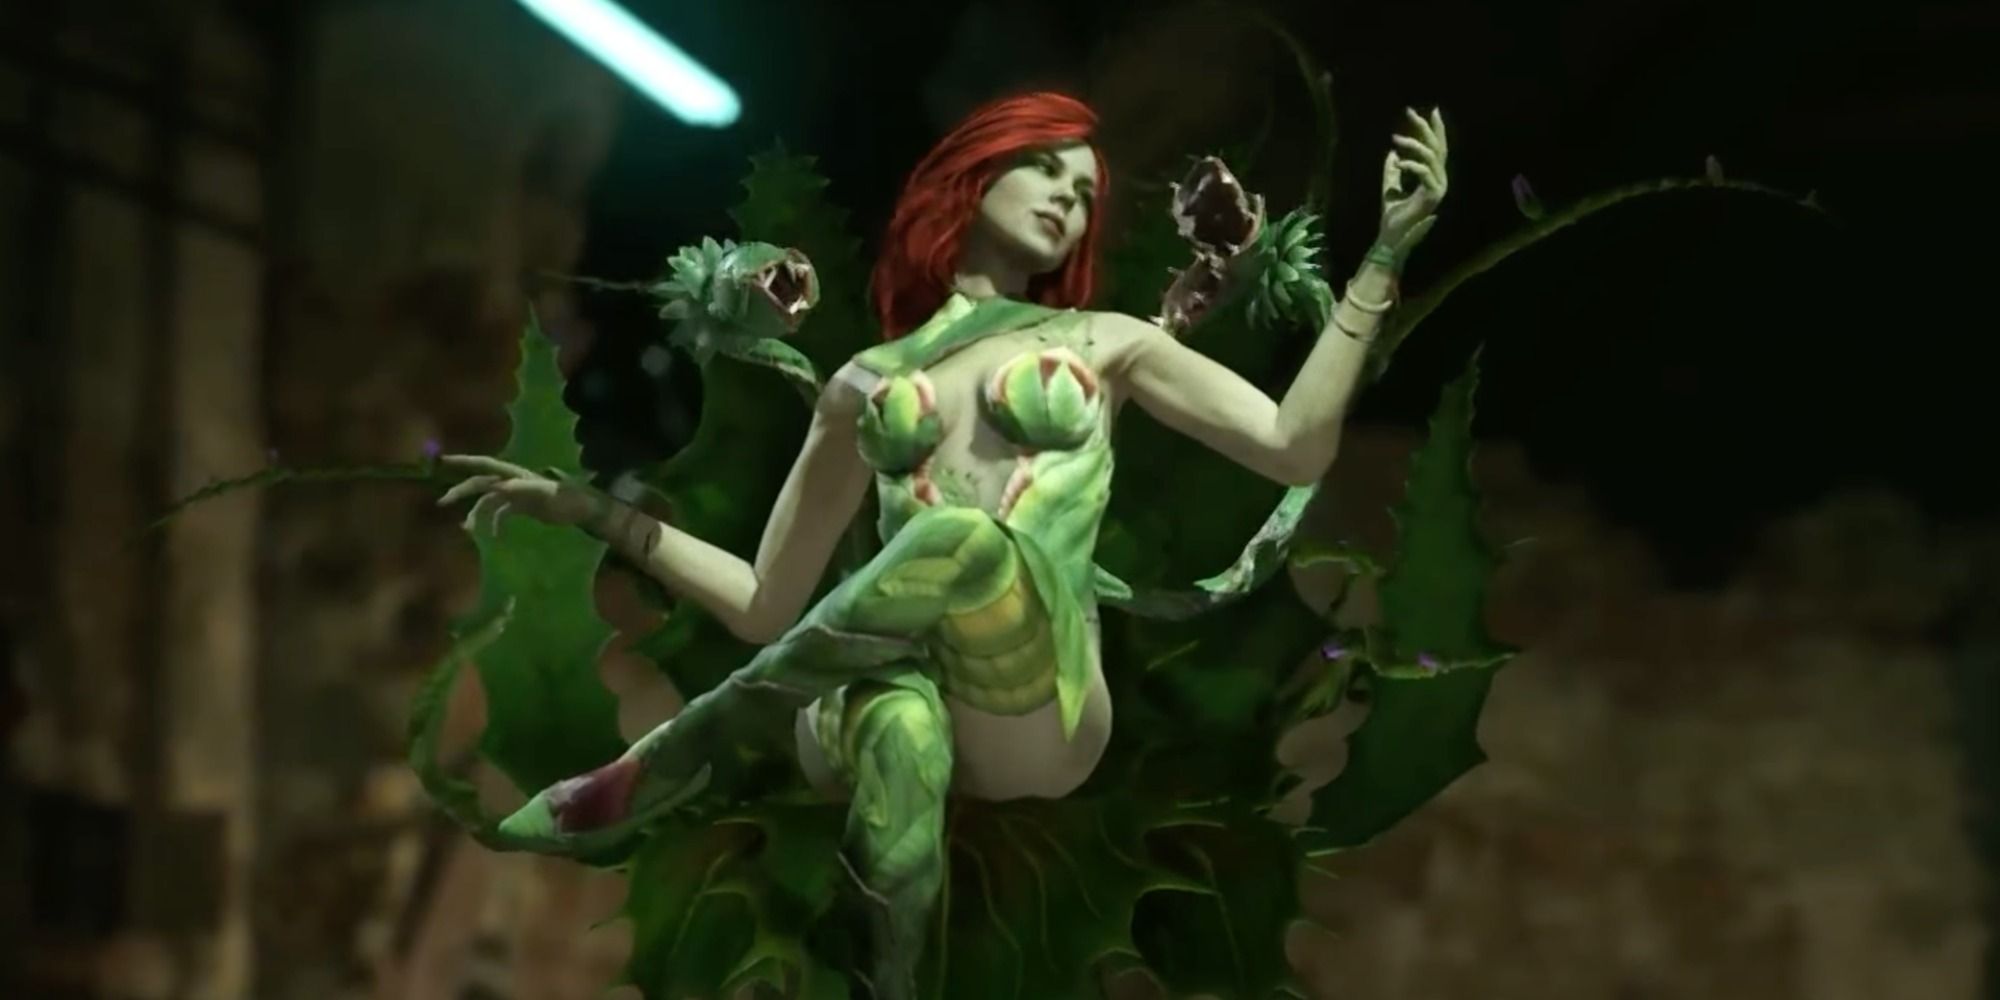 poison ivy after winning a fight in injustice 2